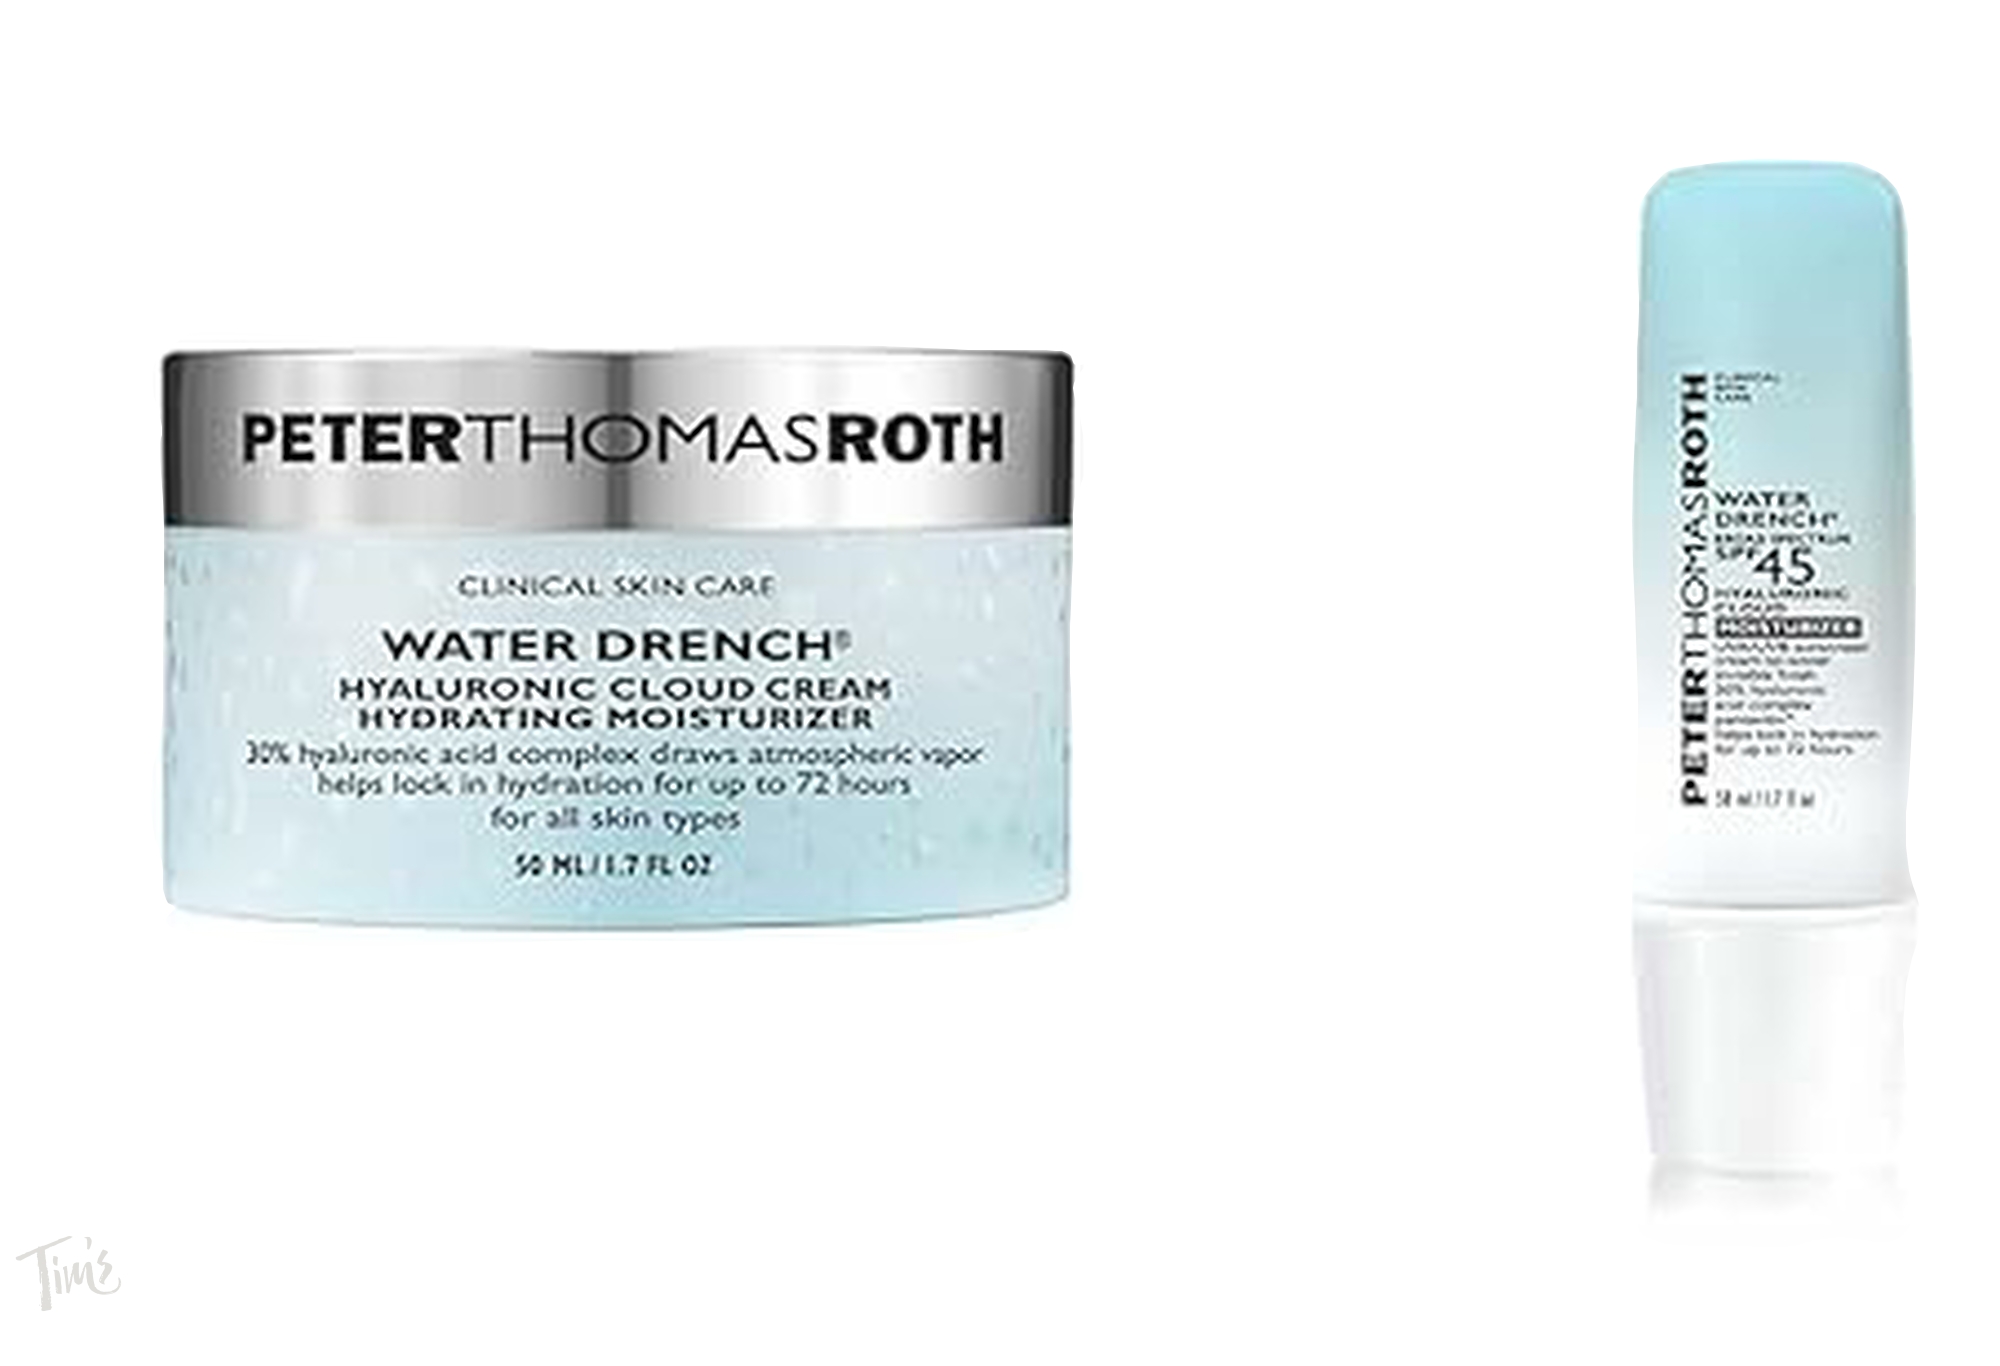 Peter Thomas Roth Water Drench Hyaluronic Cloud Cream Hydrating Moisturizer with Water Drench Broad Spectrum SPF45 Hyaluronic Cloud Moisturizer